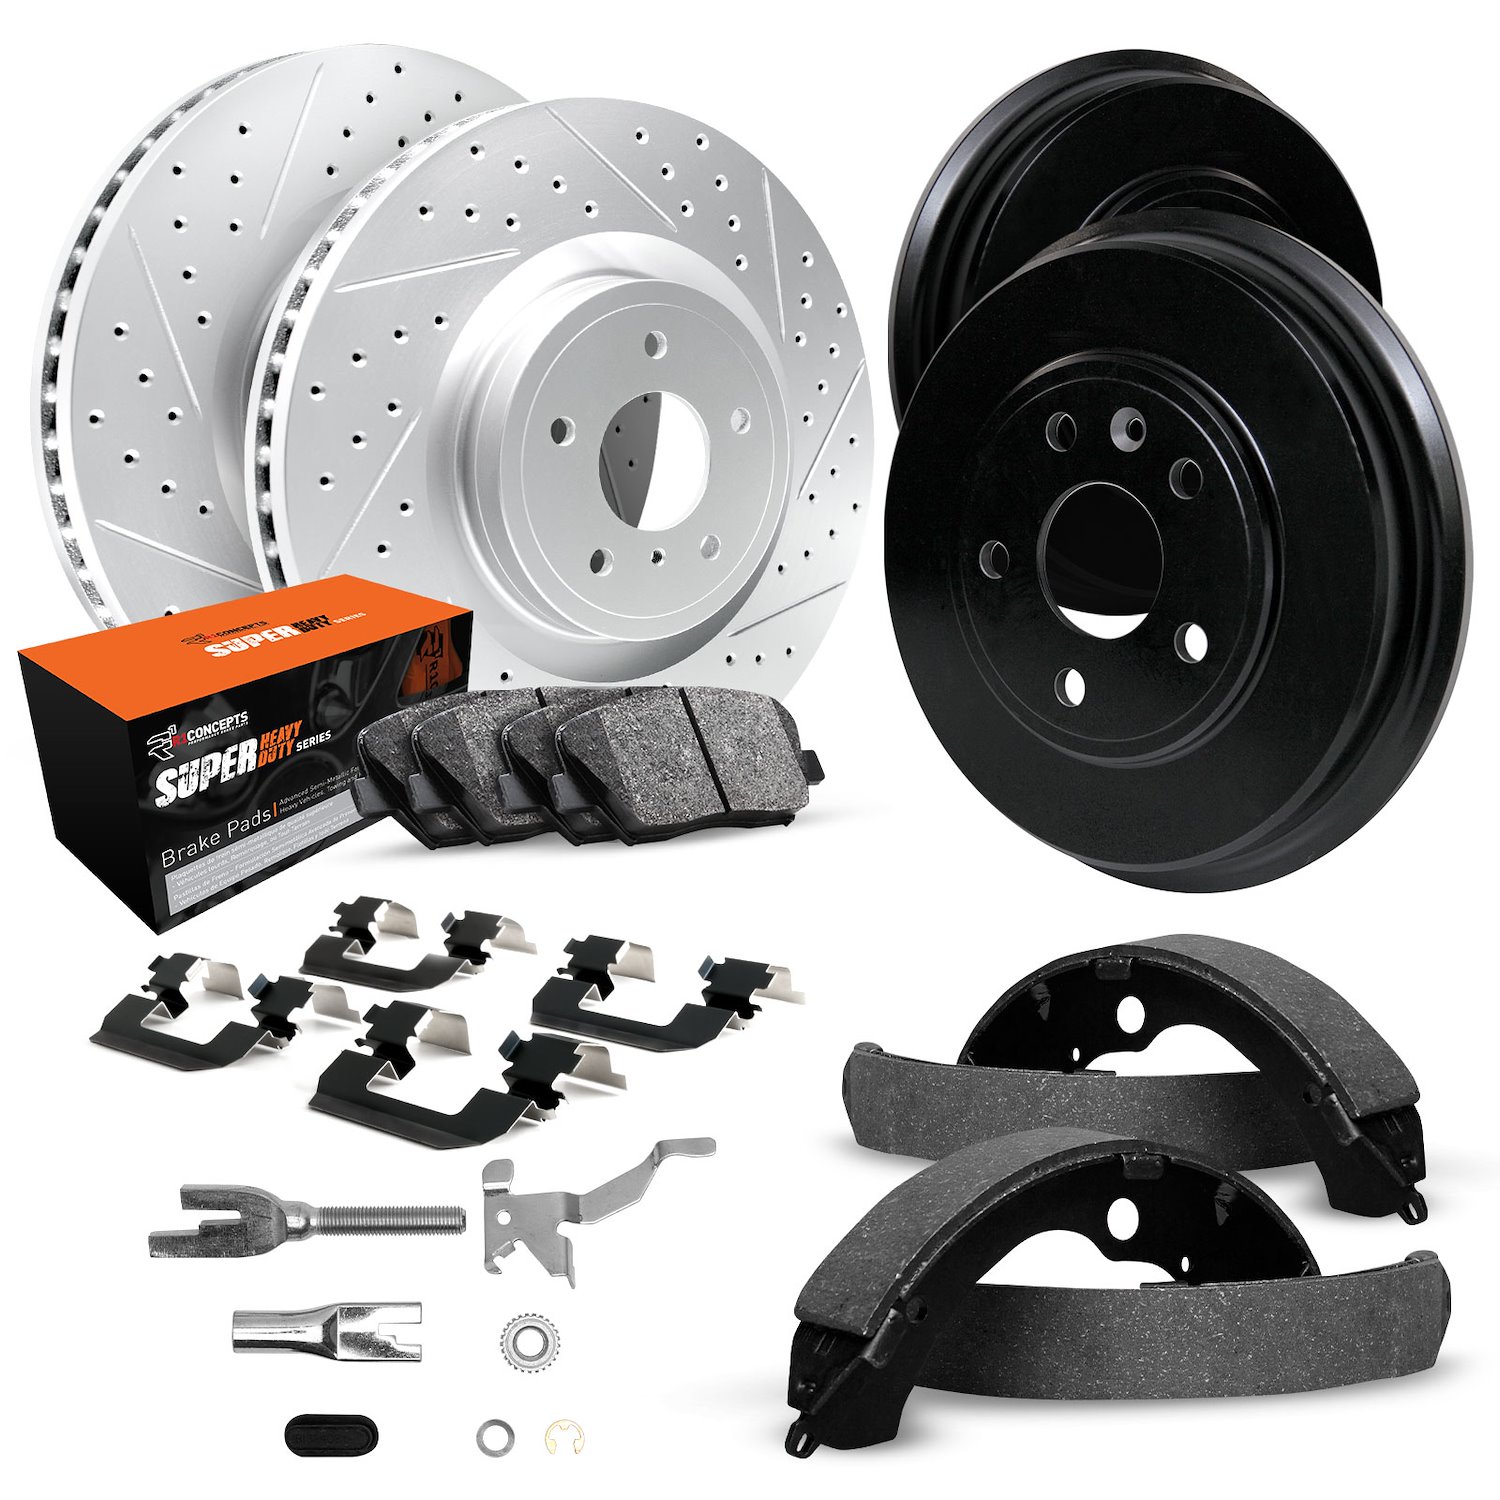 GEO-Carbon Drilled/Slotted Rotors/Drums w/Super-Duty Pads/Shoes/Hardware/Adjusters, 1990-2000 GM, Position: Front/Rear